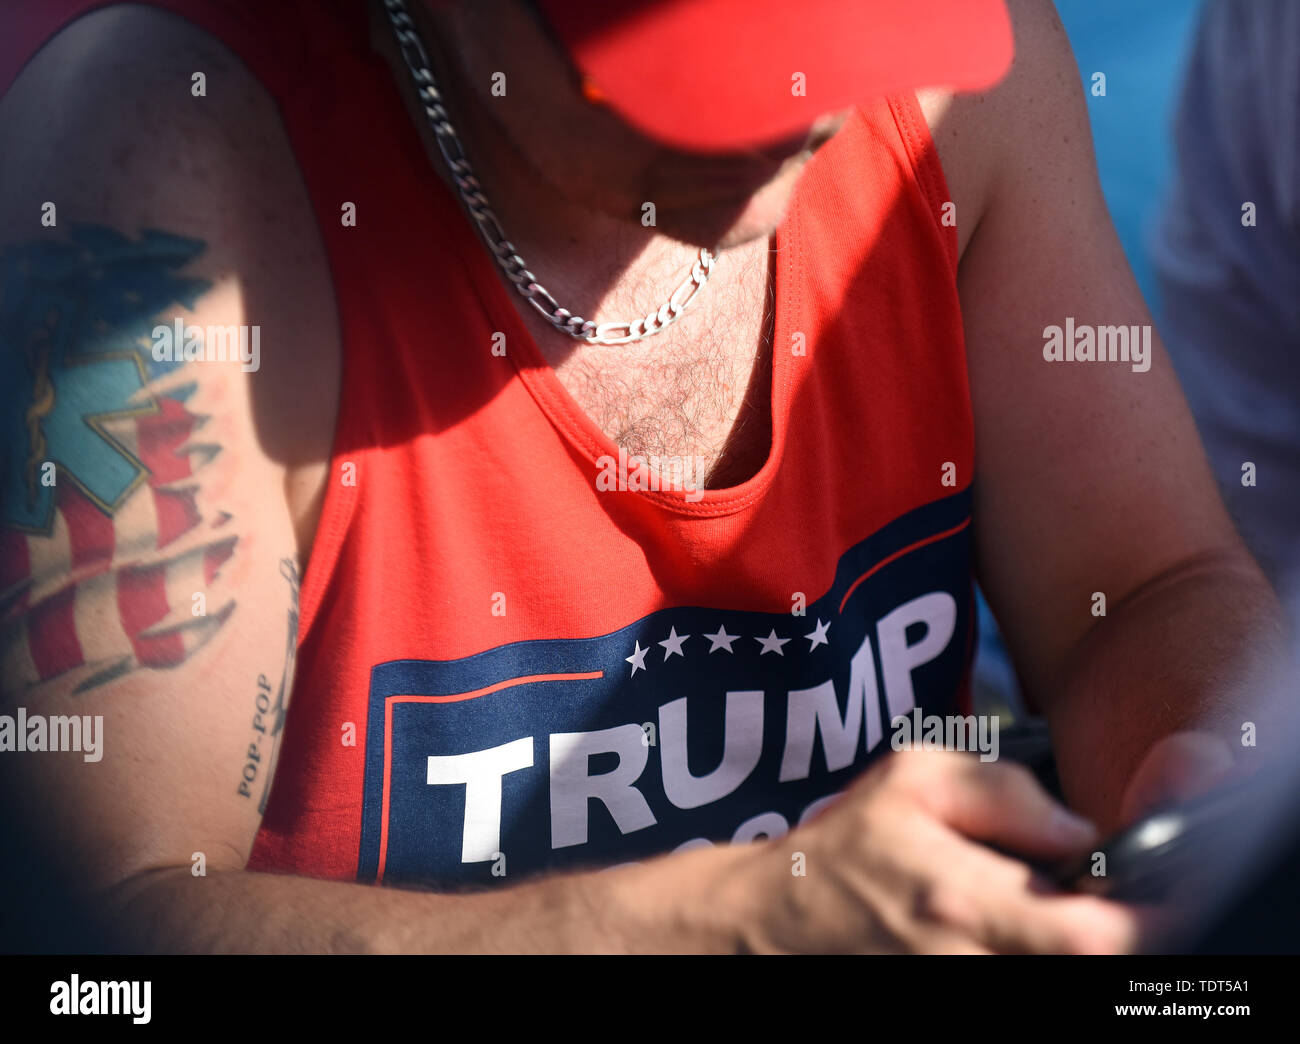 Orlando, Florida, USA. 18th June, 2019. A supporter of U.S. President Donald Trump waits in line for a Make America Great Again rally at the Amway Center on June 18, 2019 in Orlando, Florida. The rally is billed as Trump's kick-off event for his campaign for re-election in 2020. (Paul Hennessy/Alamy) Credit: Paul Hennessy/Alamy Live News Stock Photo